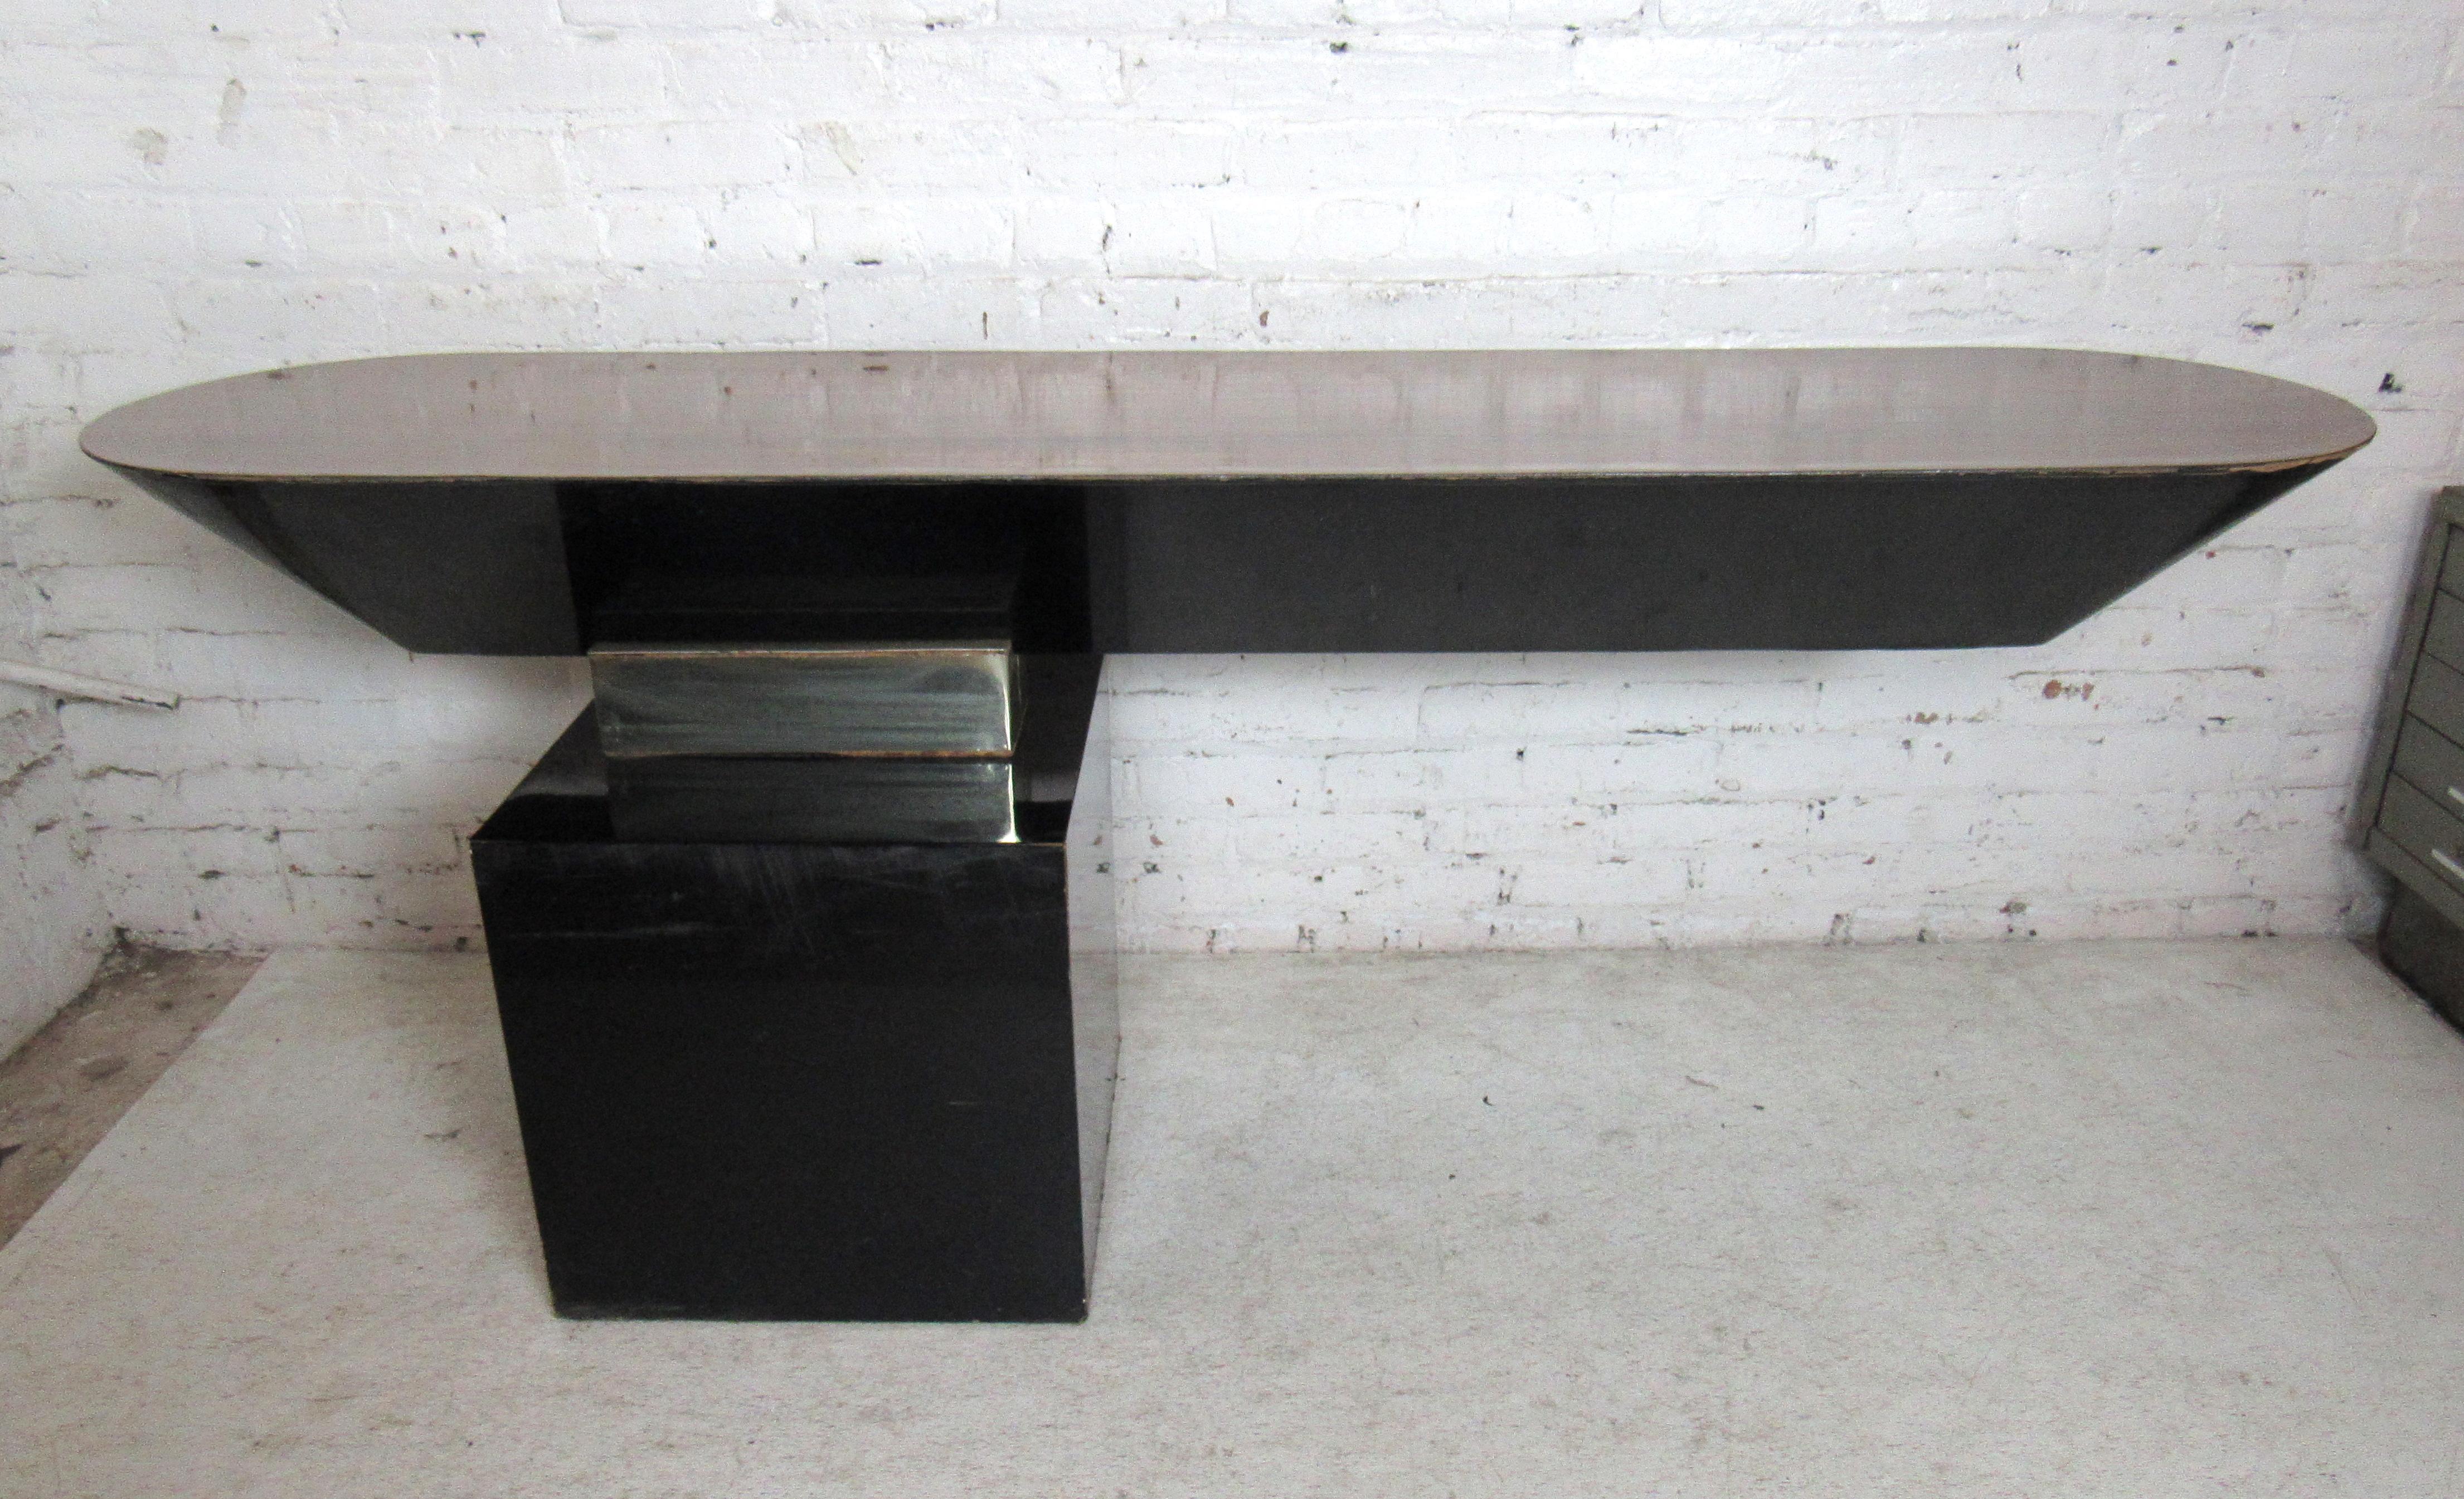 Vintage modern floating desk features a veneer wood top, with a black laminated base.
This desk can also be used as a console for your home or office.

Please confirm item location (NJ or BK).